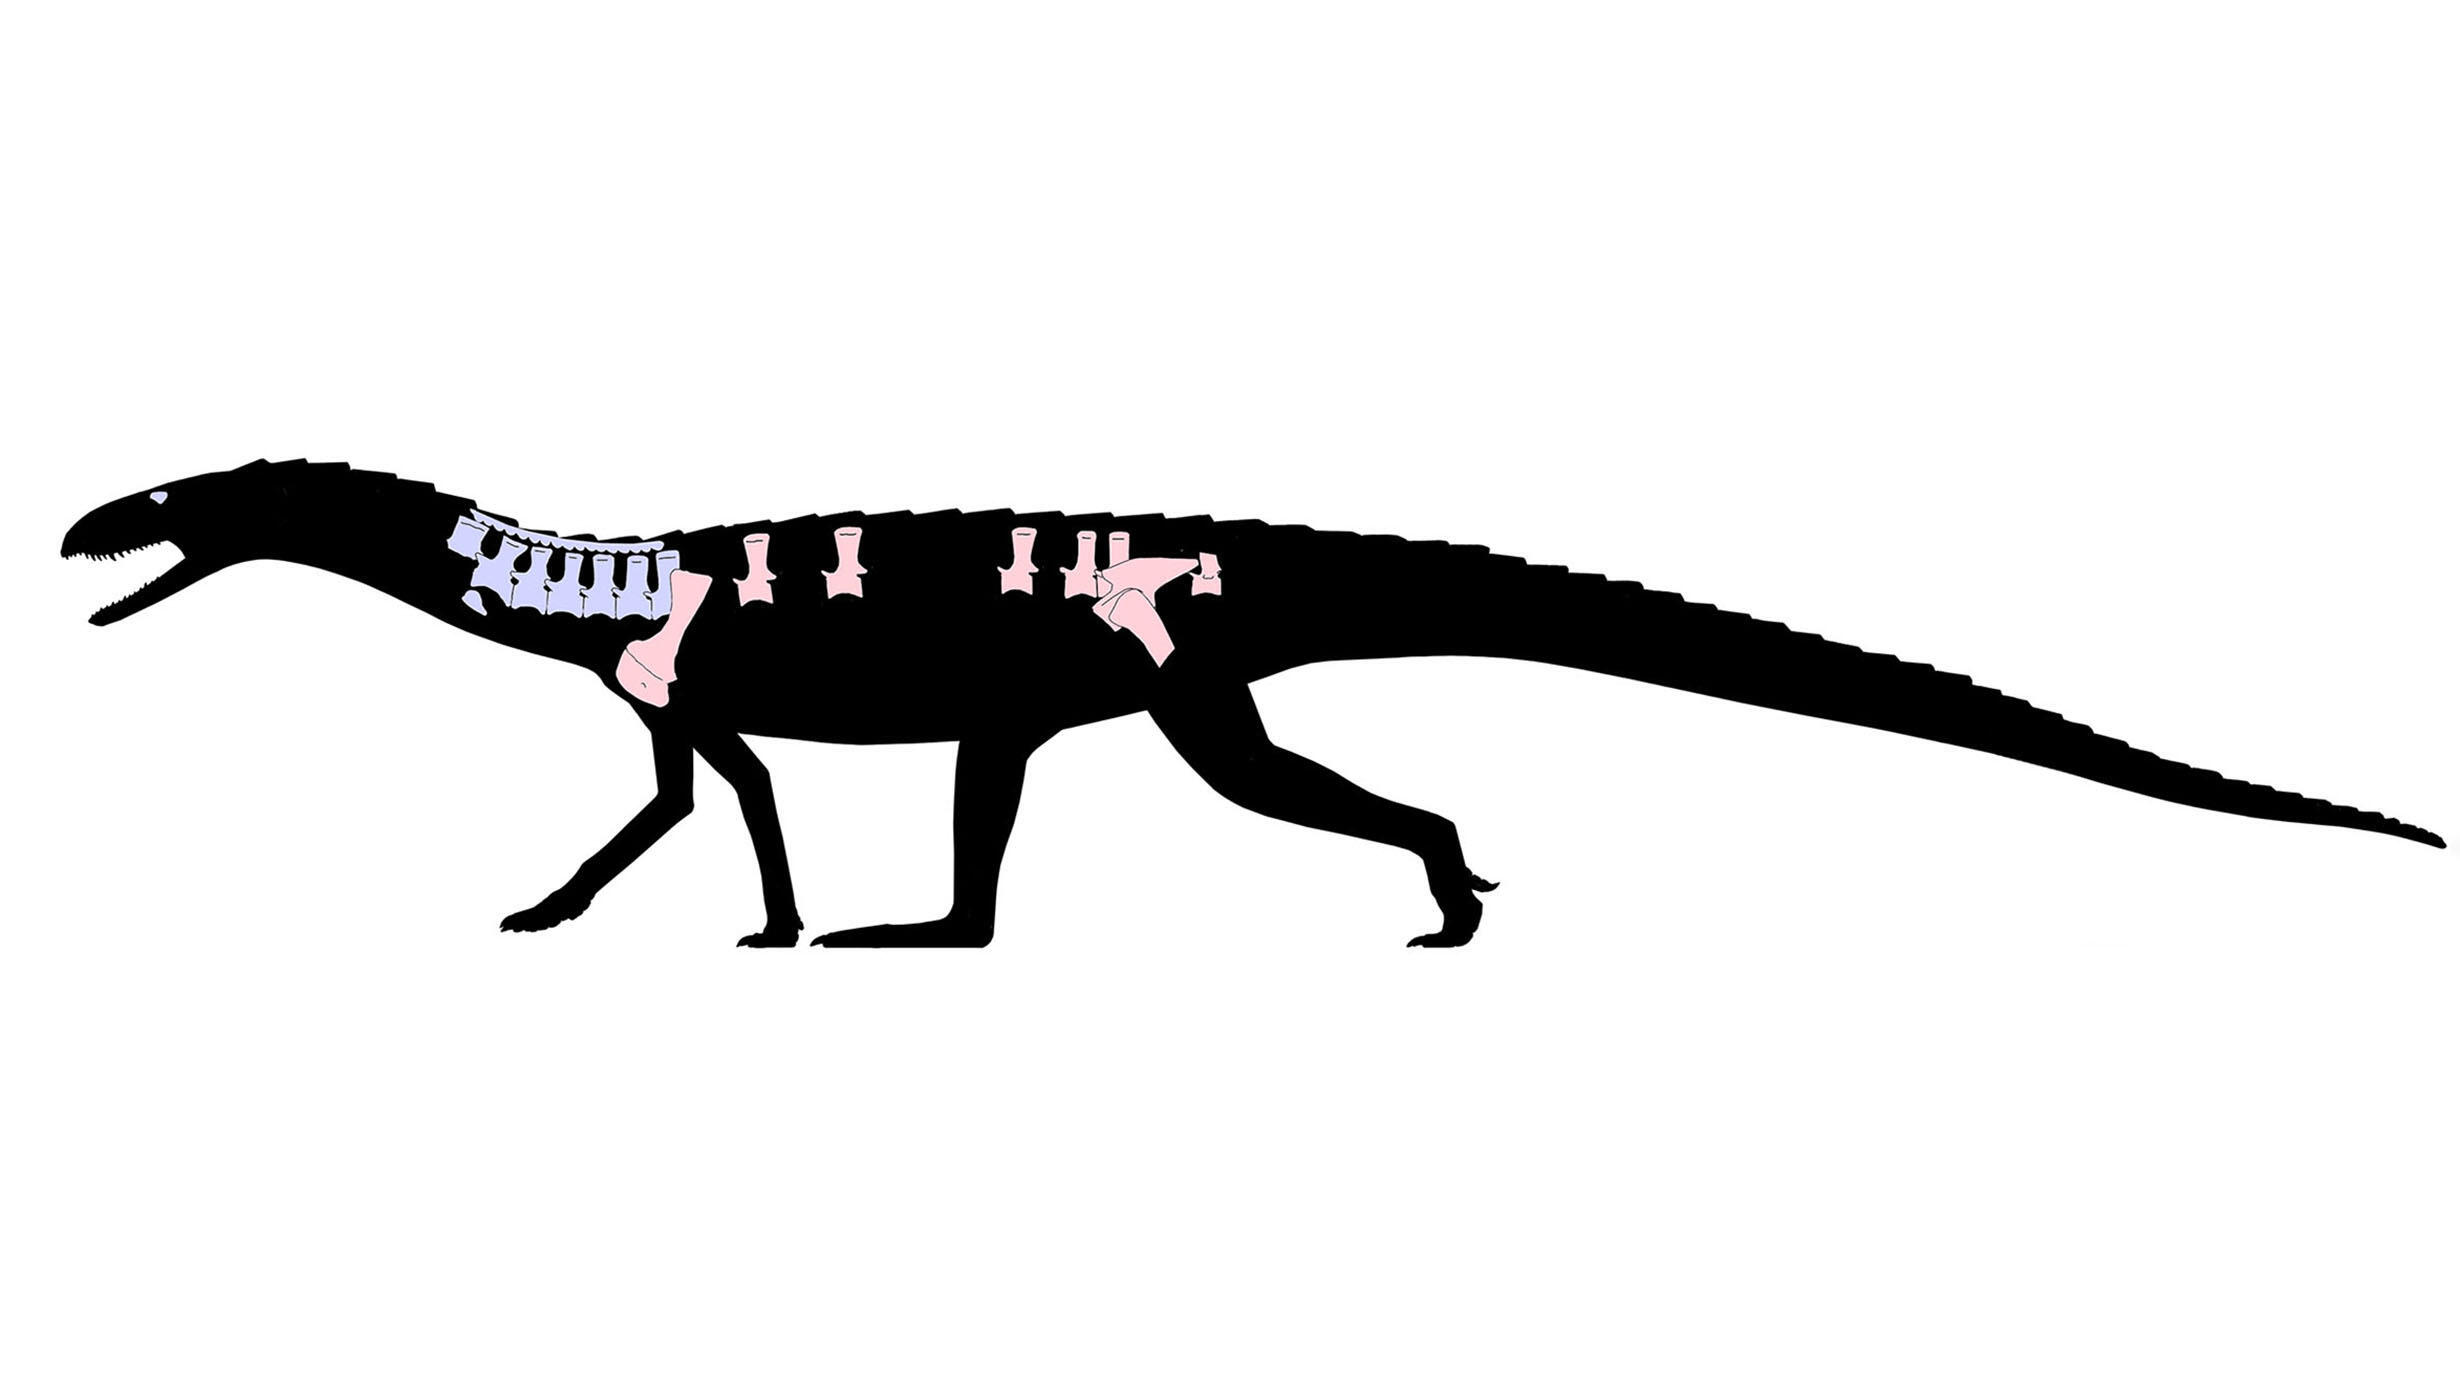 Illustrated reconstruction of newly described archosaur species, Mambachiton fiandohana, with back and neck bones highlighted and colored.